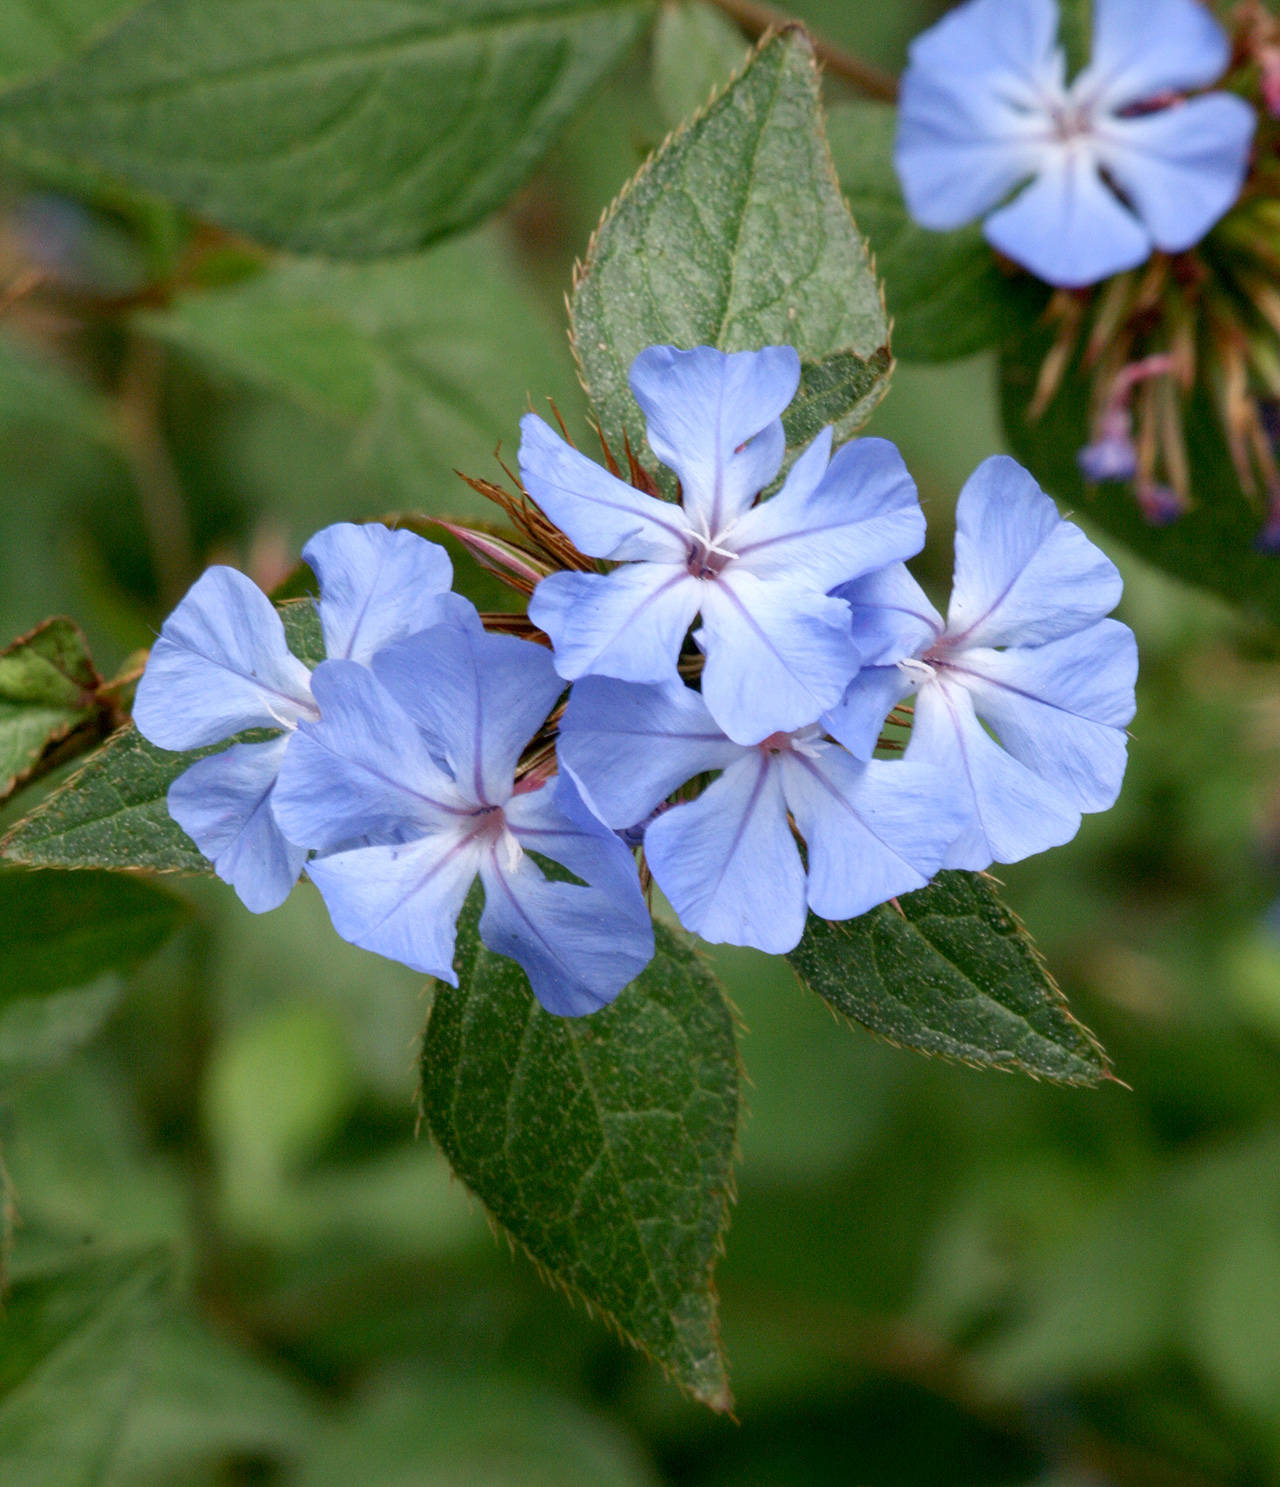 Ceratostigma willmottianum, commonly called Chinese plumbago, is drought-tolerant and loves a hot location. (Richie Steffen)